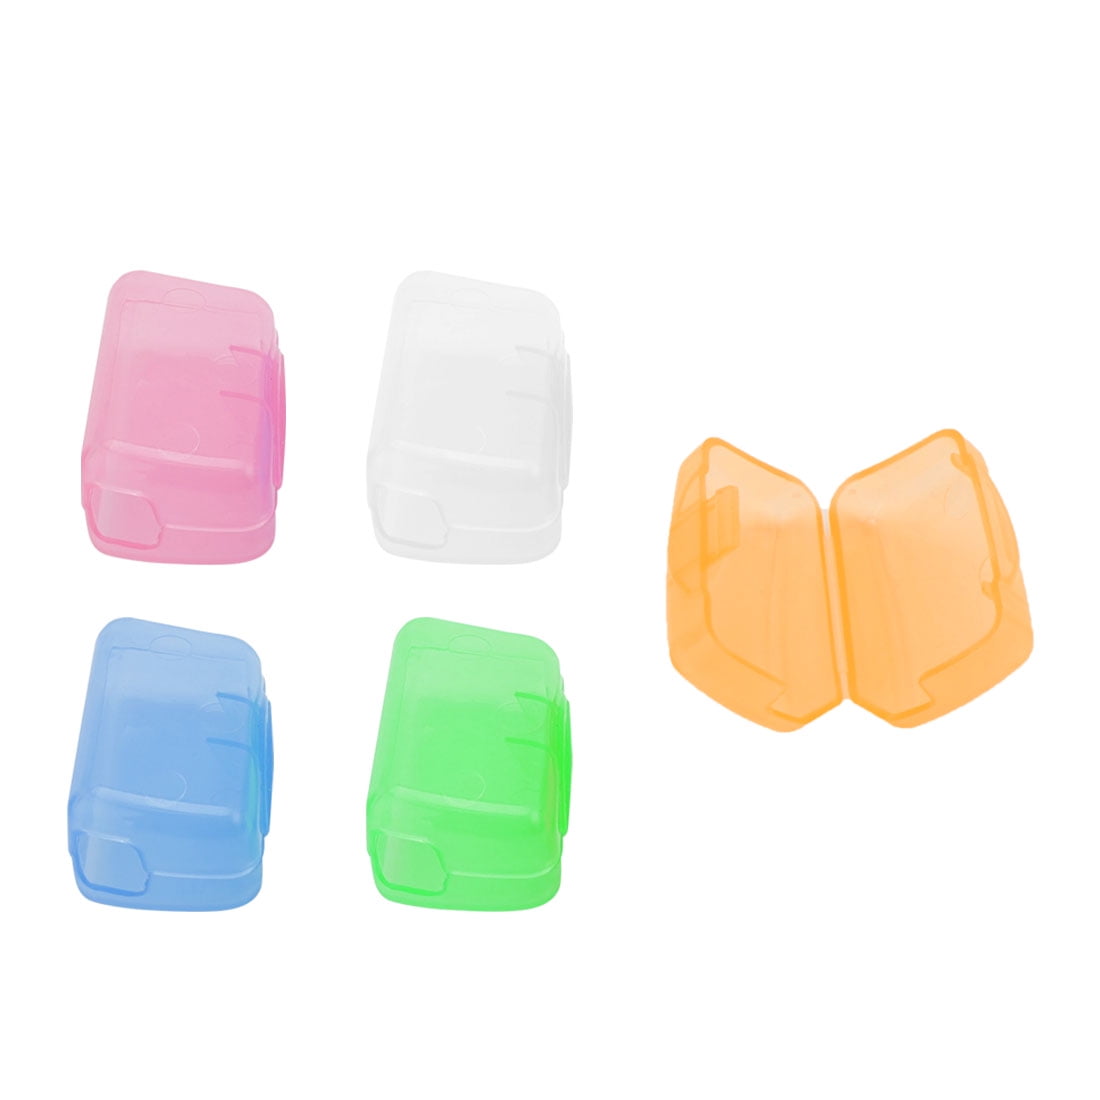 Details about   Quality Silicone Toothbrush Head Cover Electric Toothbrush Protective Cap Cover 